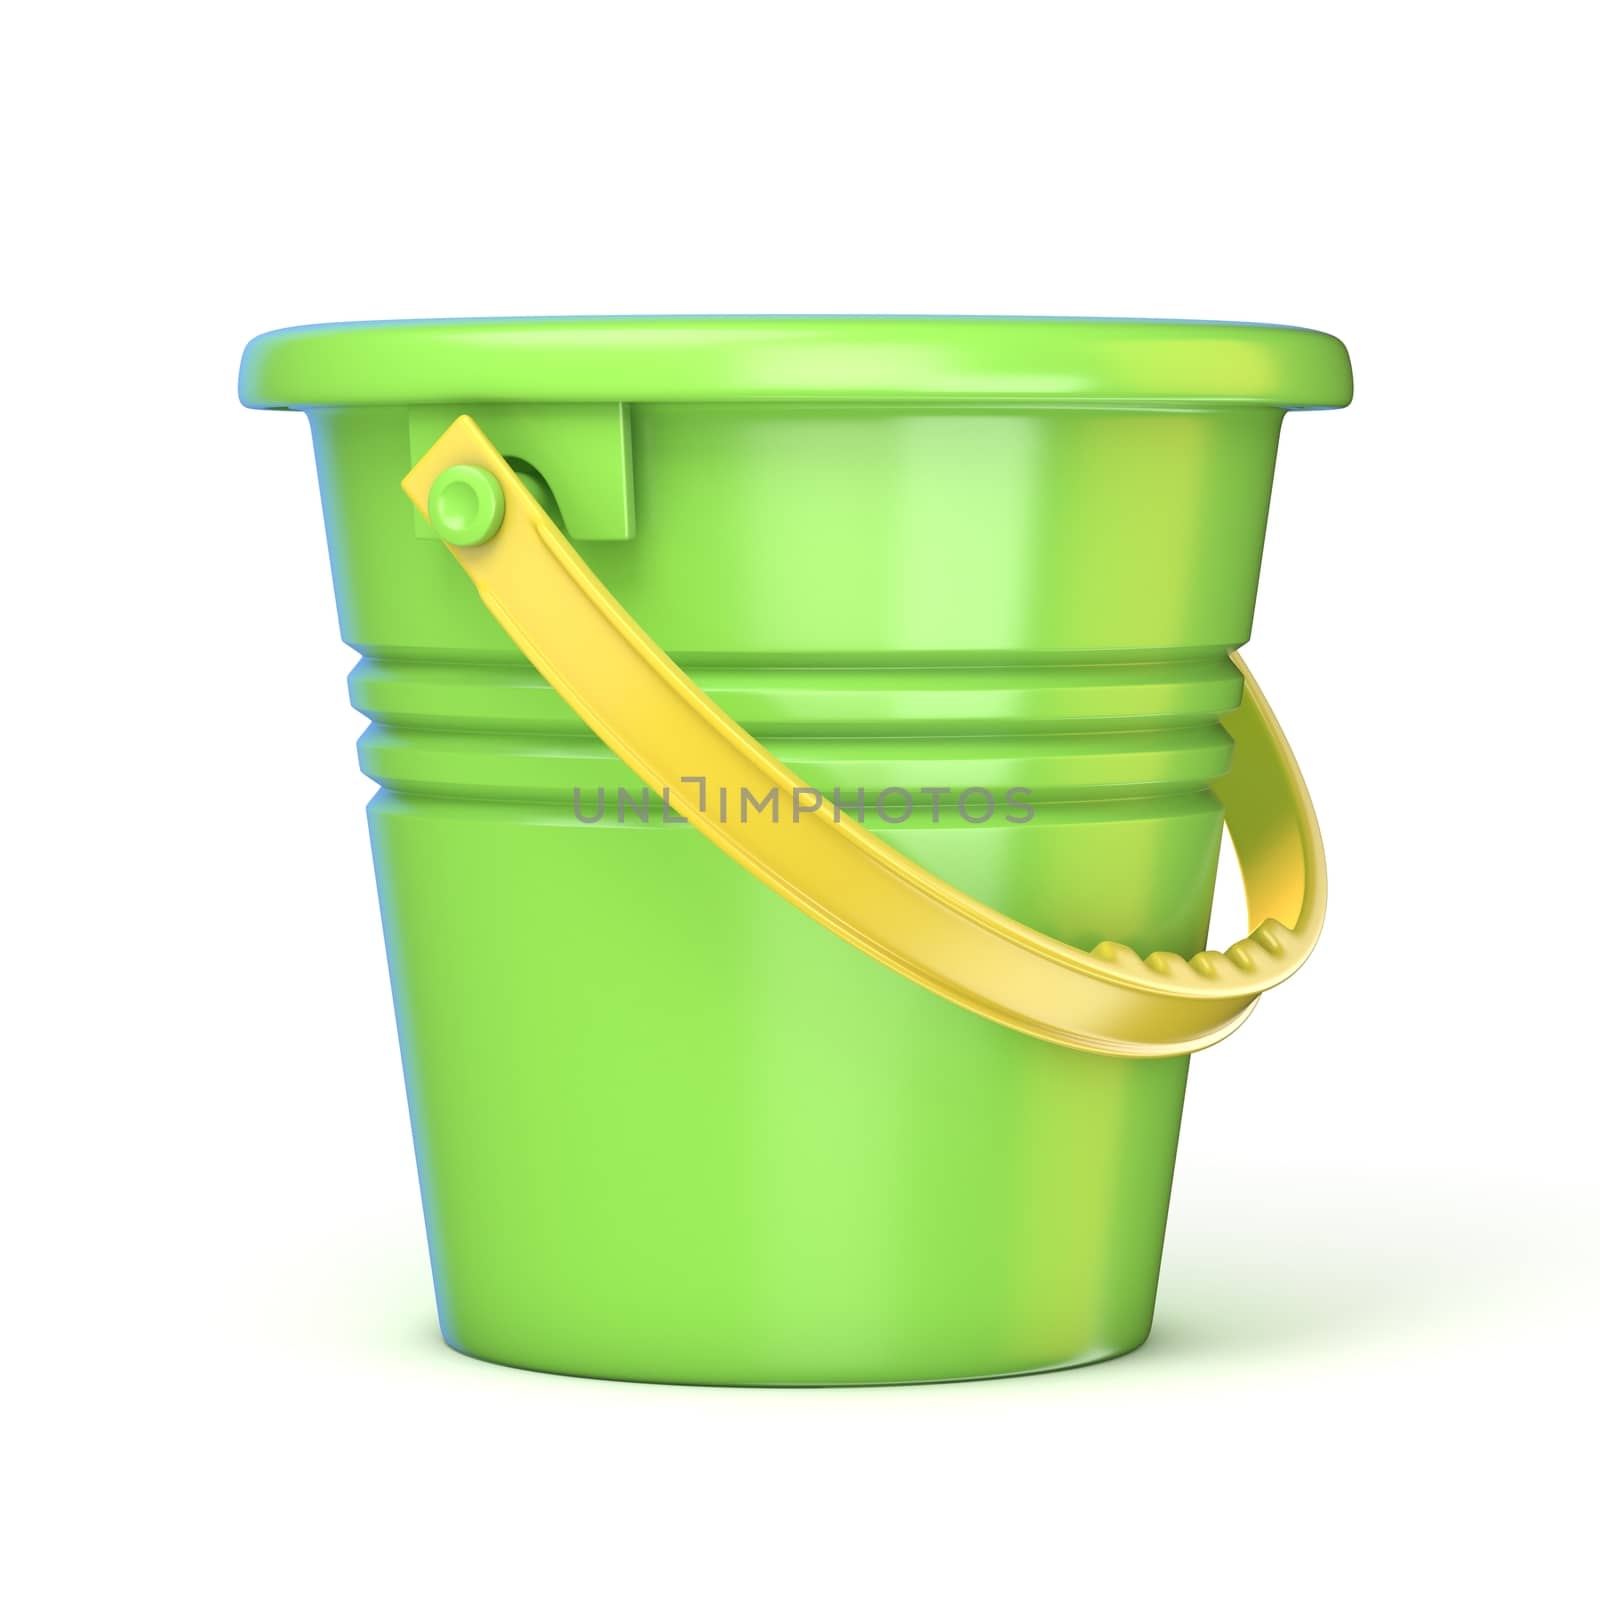 Green yellow sand toy bucket. 3D by djmilic